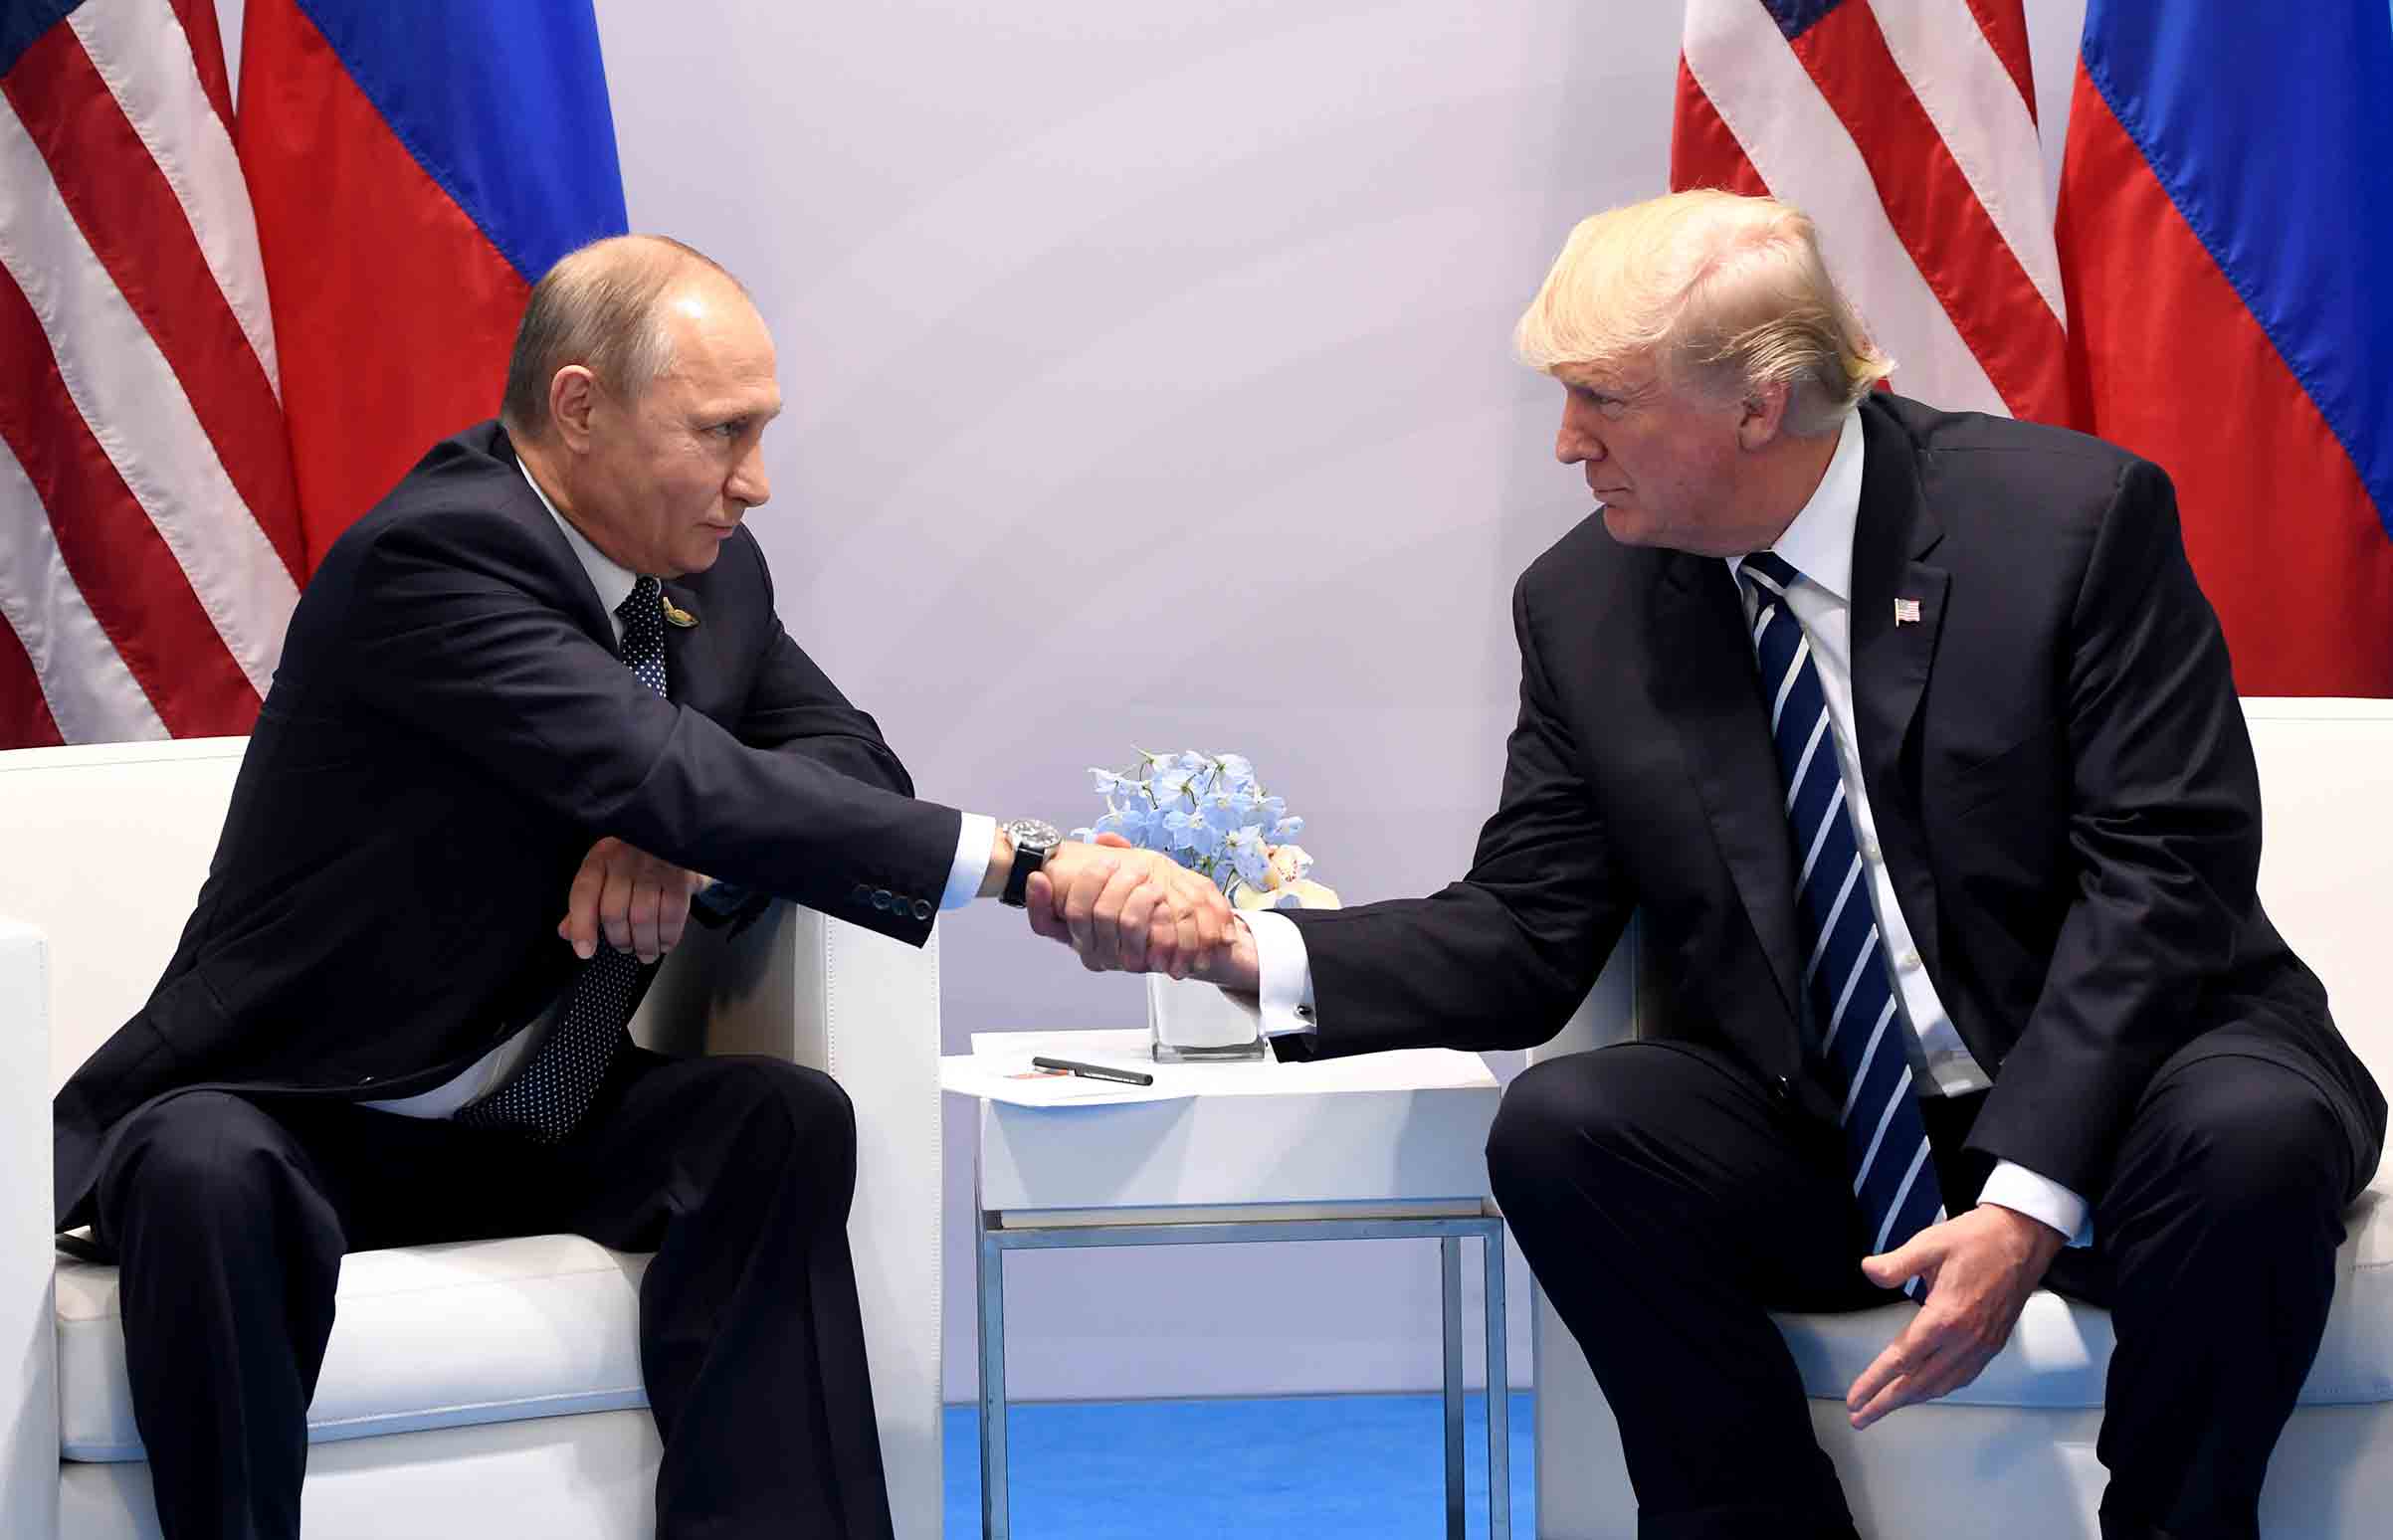 President Donald Trump and Russia's President Vladimir Putin shake hands during a meeting on the sidelines of the G20 Summit in Hamburg, Germany, on July 7, 2017. (Saul Loeb—AFP/Getty Images)